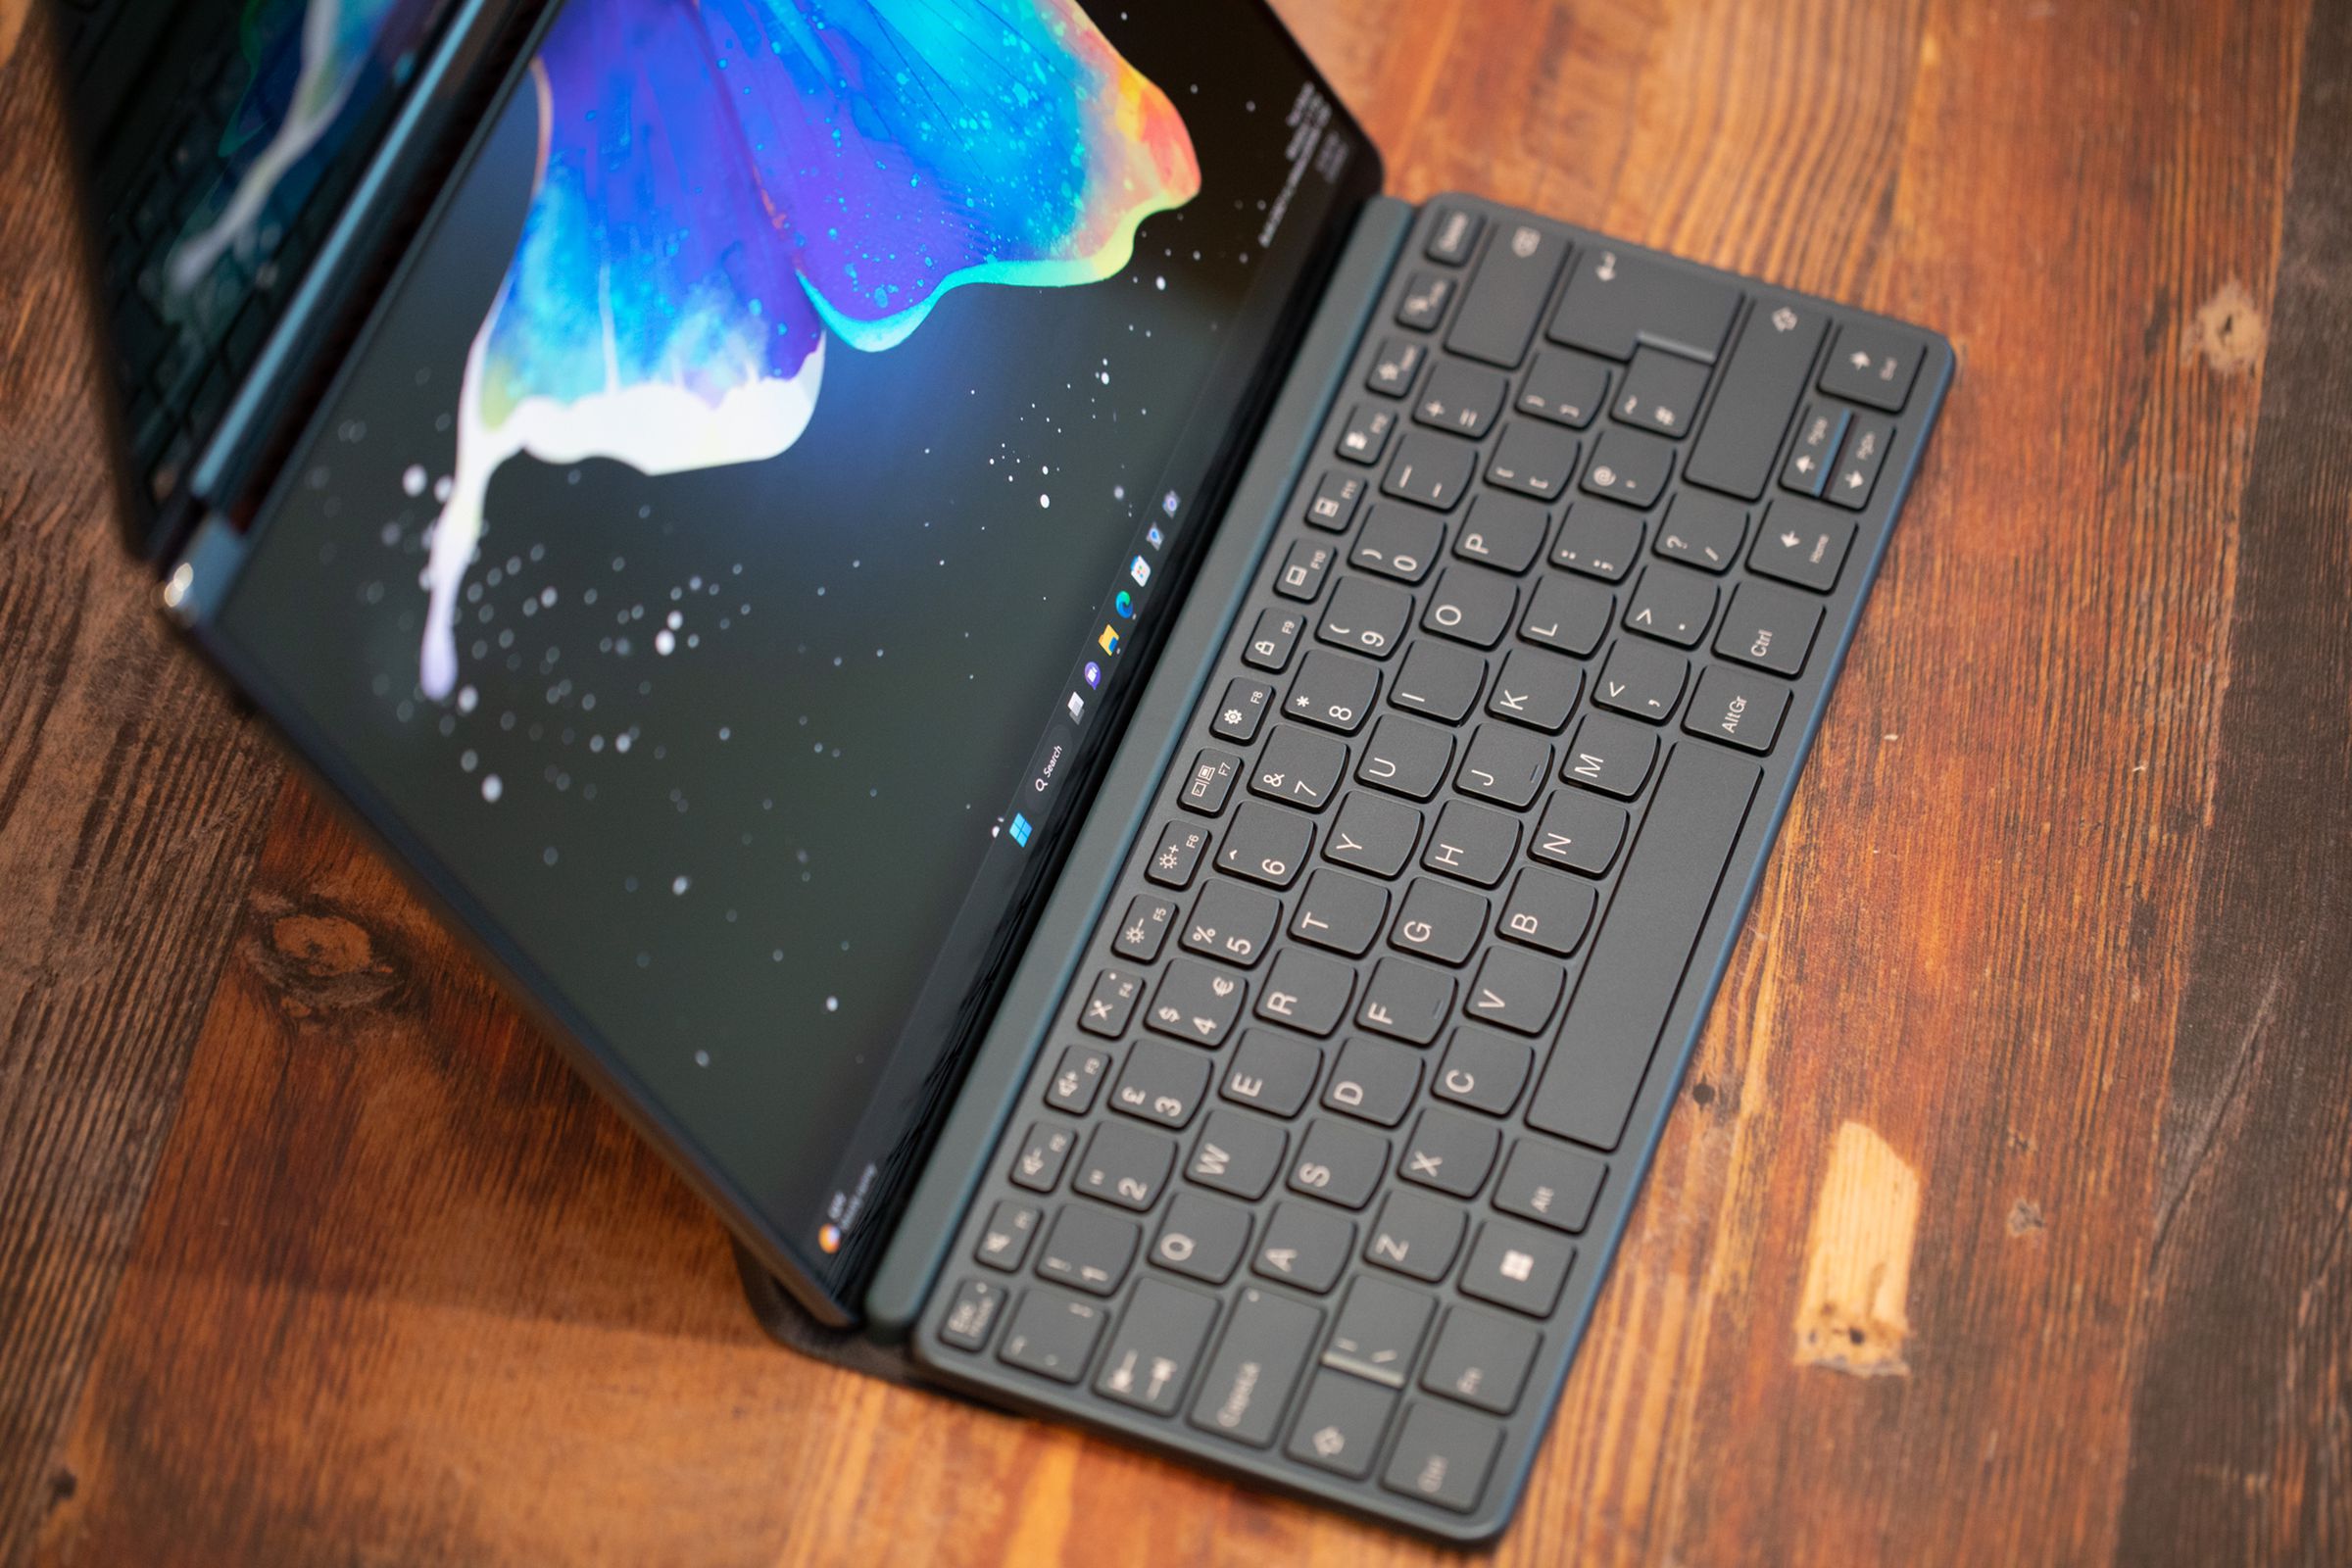 The keyboard attached to Lenovo's Yoga Book 9i in portrait mode.